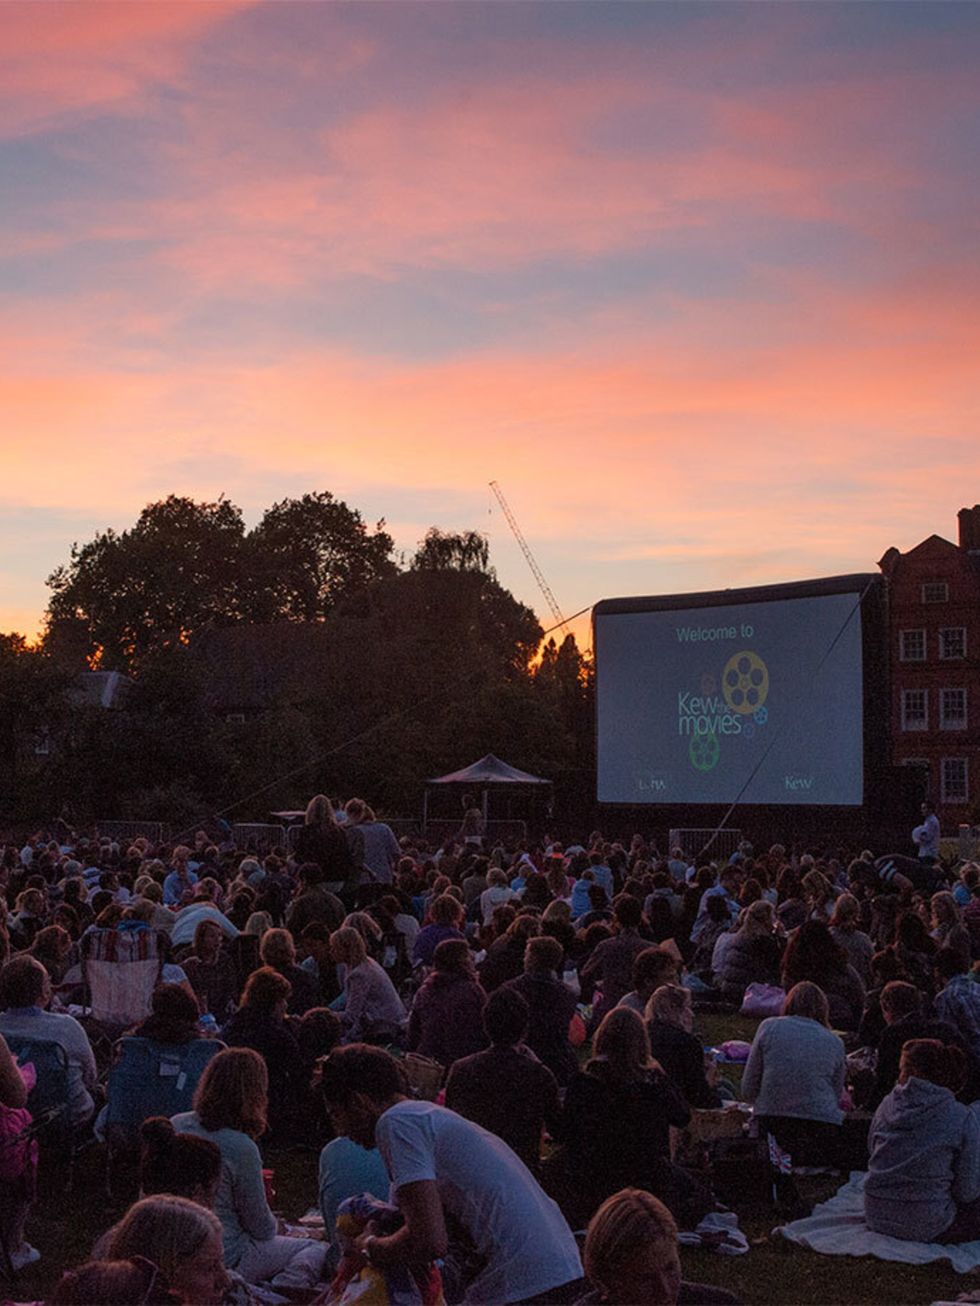 <p><strong>FILM: Kew The Movies</strong></p>

<p>Kew gardens and The Lunar Cinema have teamed up again to bring al fresco screenings to film lovers, in the beautiful setting of the botanical gardens.</p>

<p>What better backdrop for Baz Luhrmanns enchant